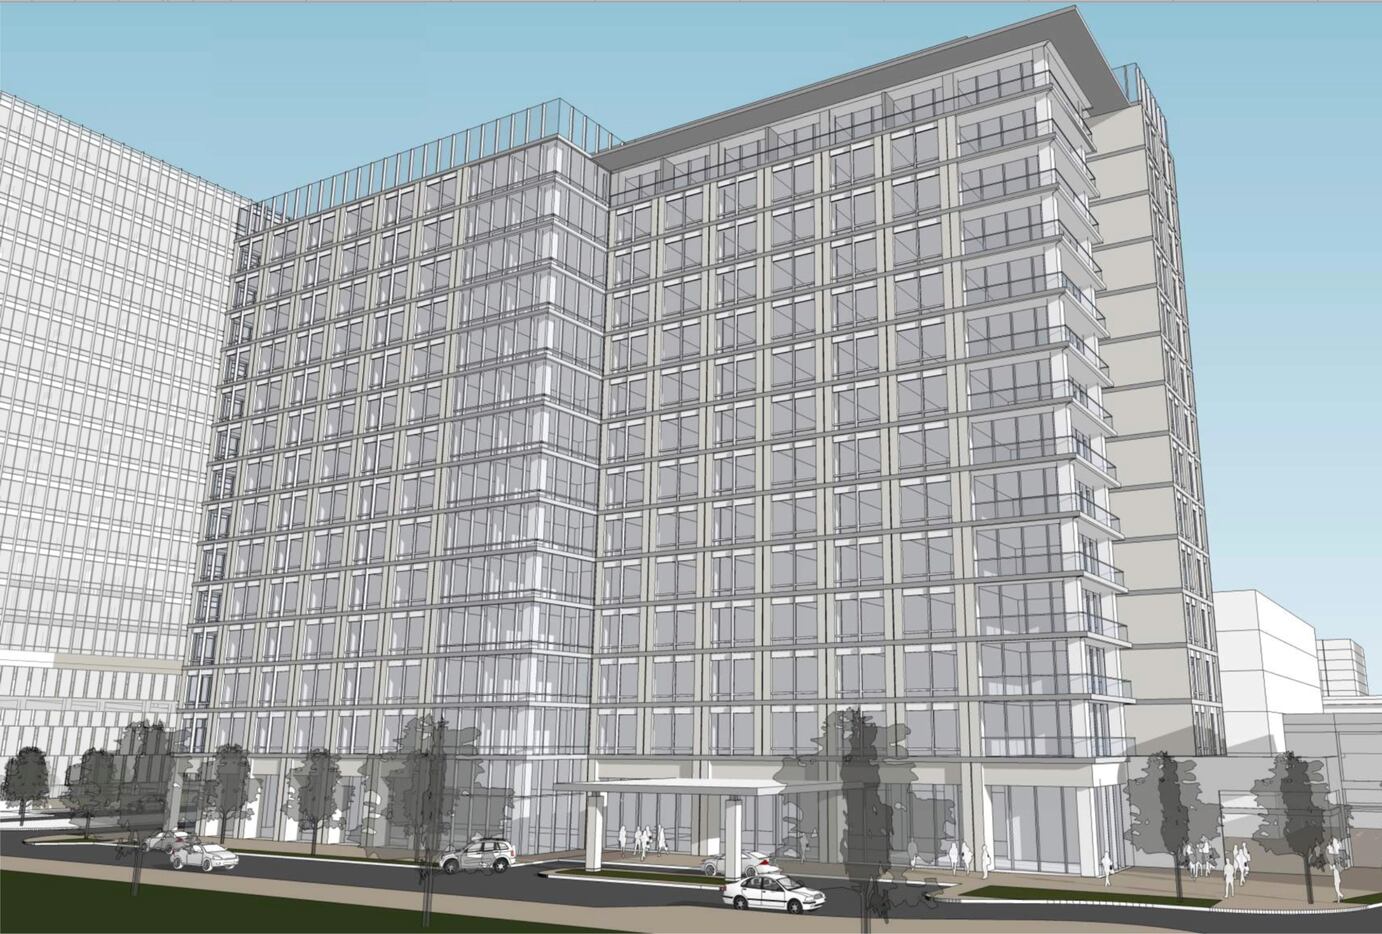 A high-rise hotel is planned as part of the Lesso America project in Frisco.